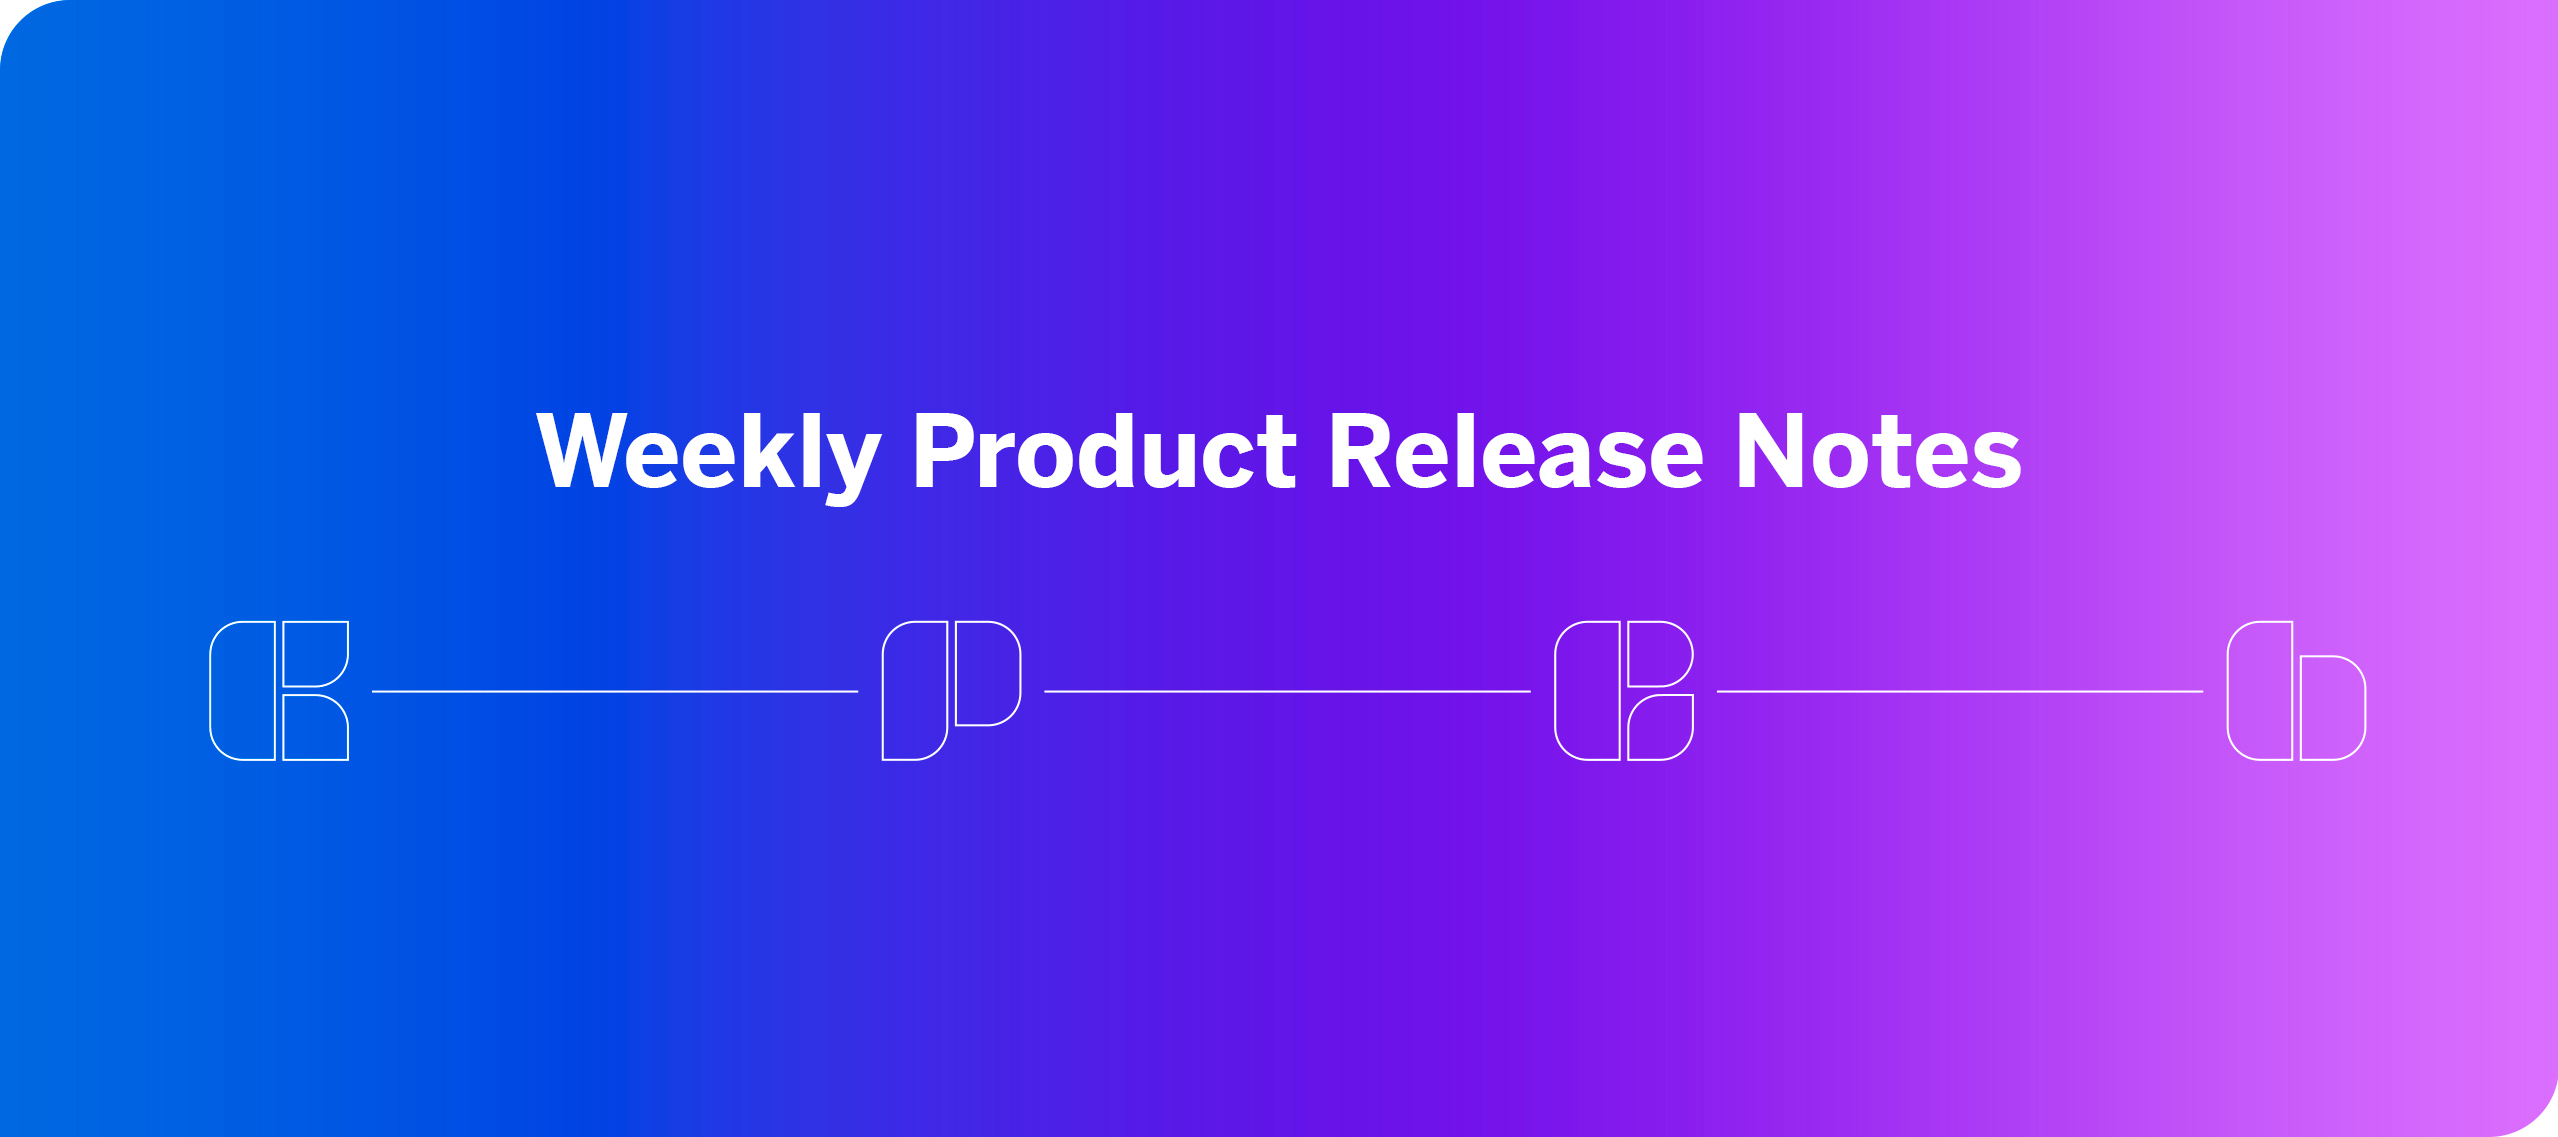 Introducing Weekly Product Release Notes